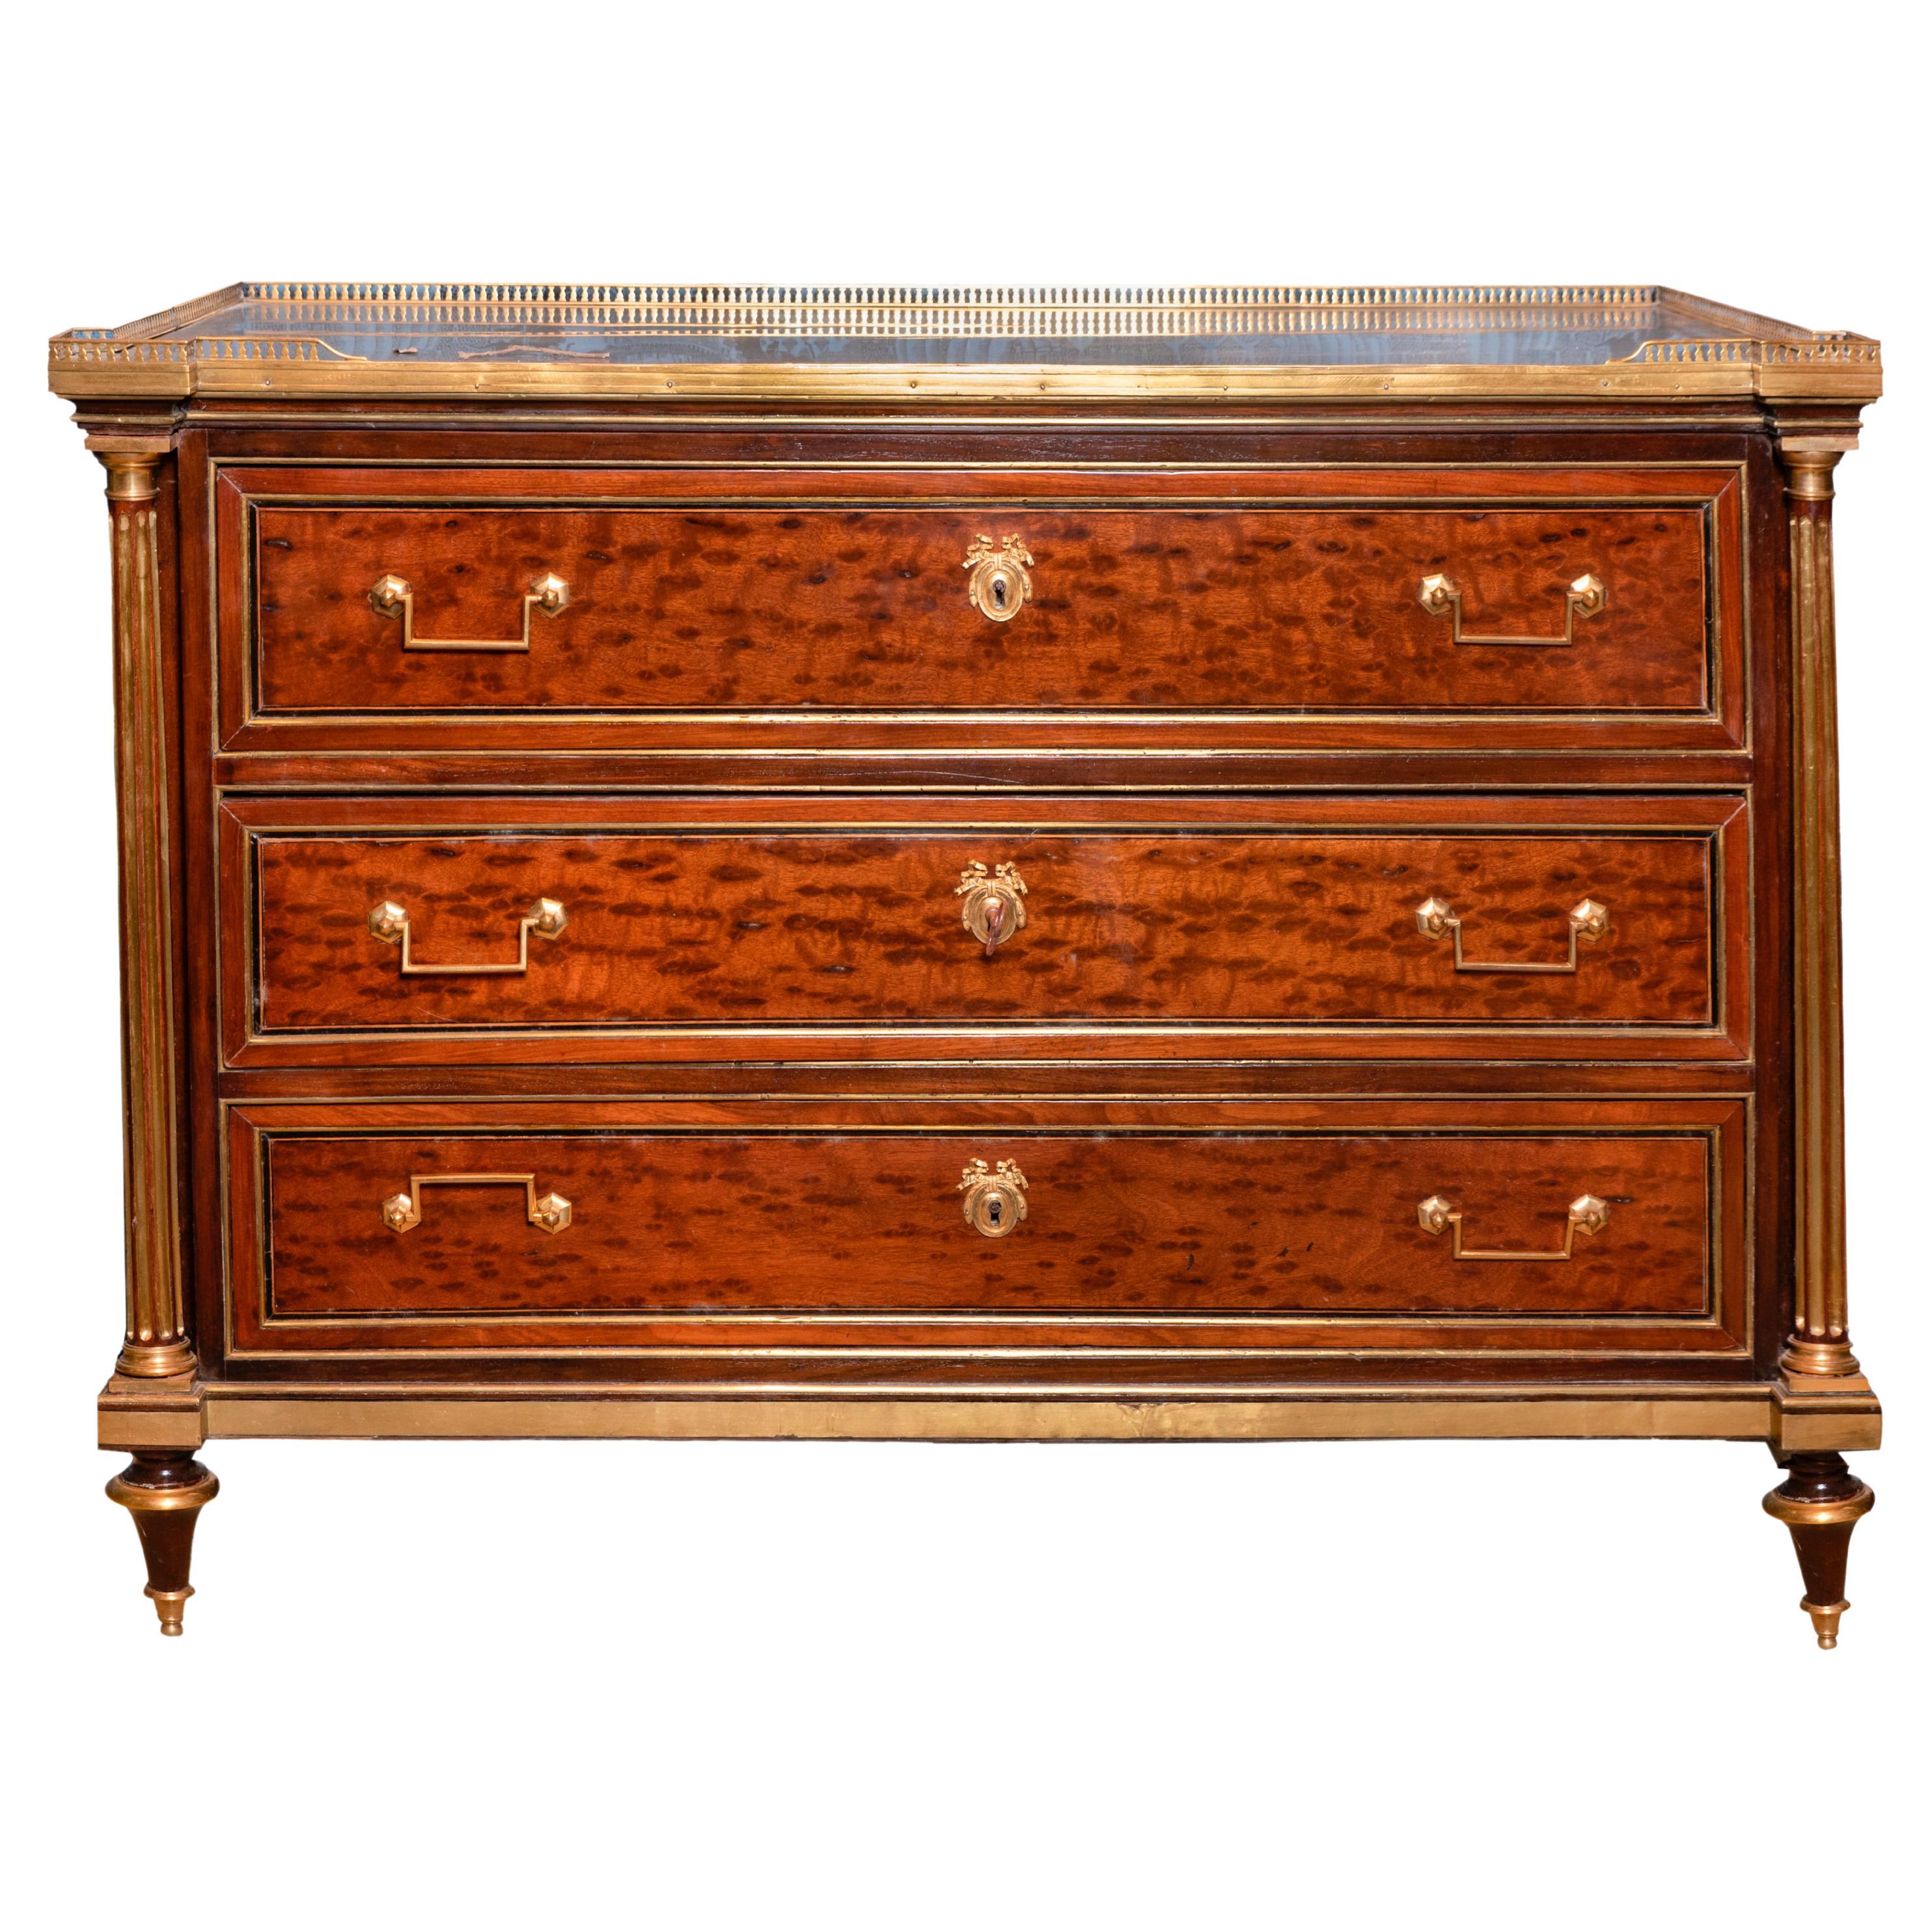 19th century french Louis XVI mahogany, marble and brass commode